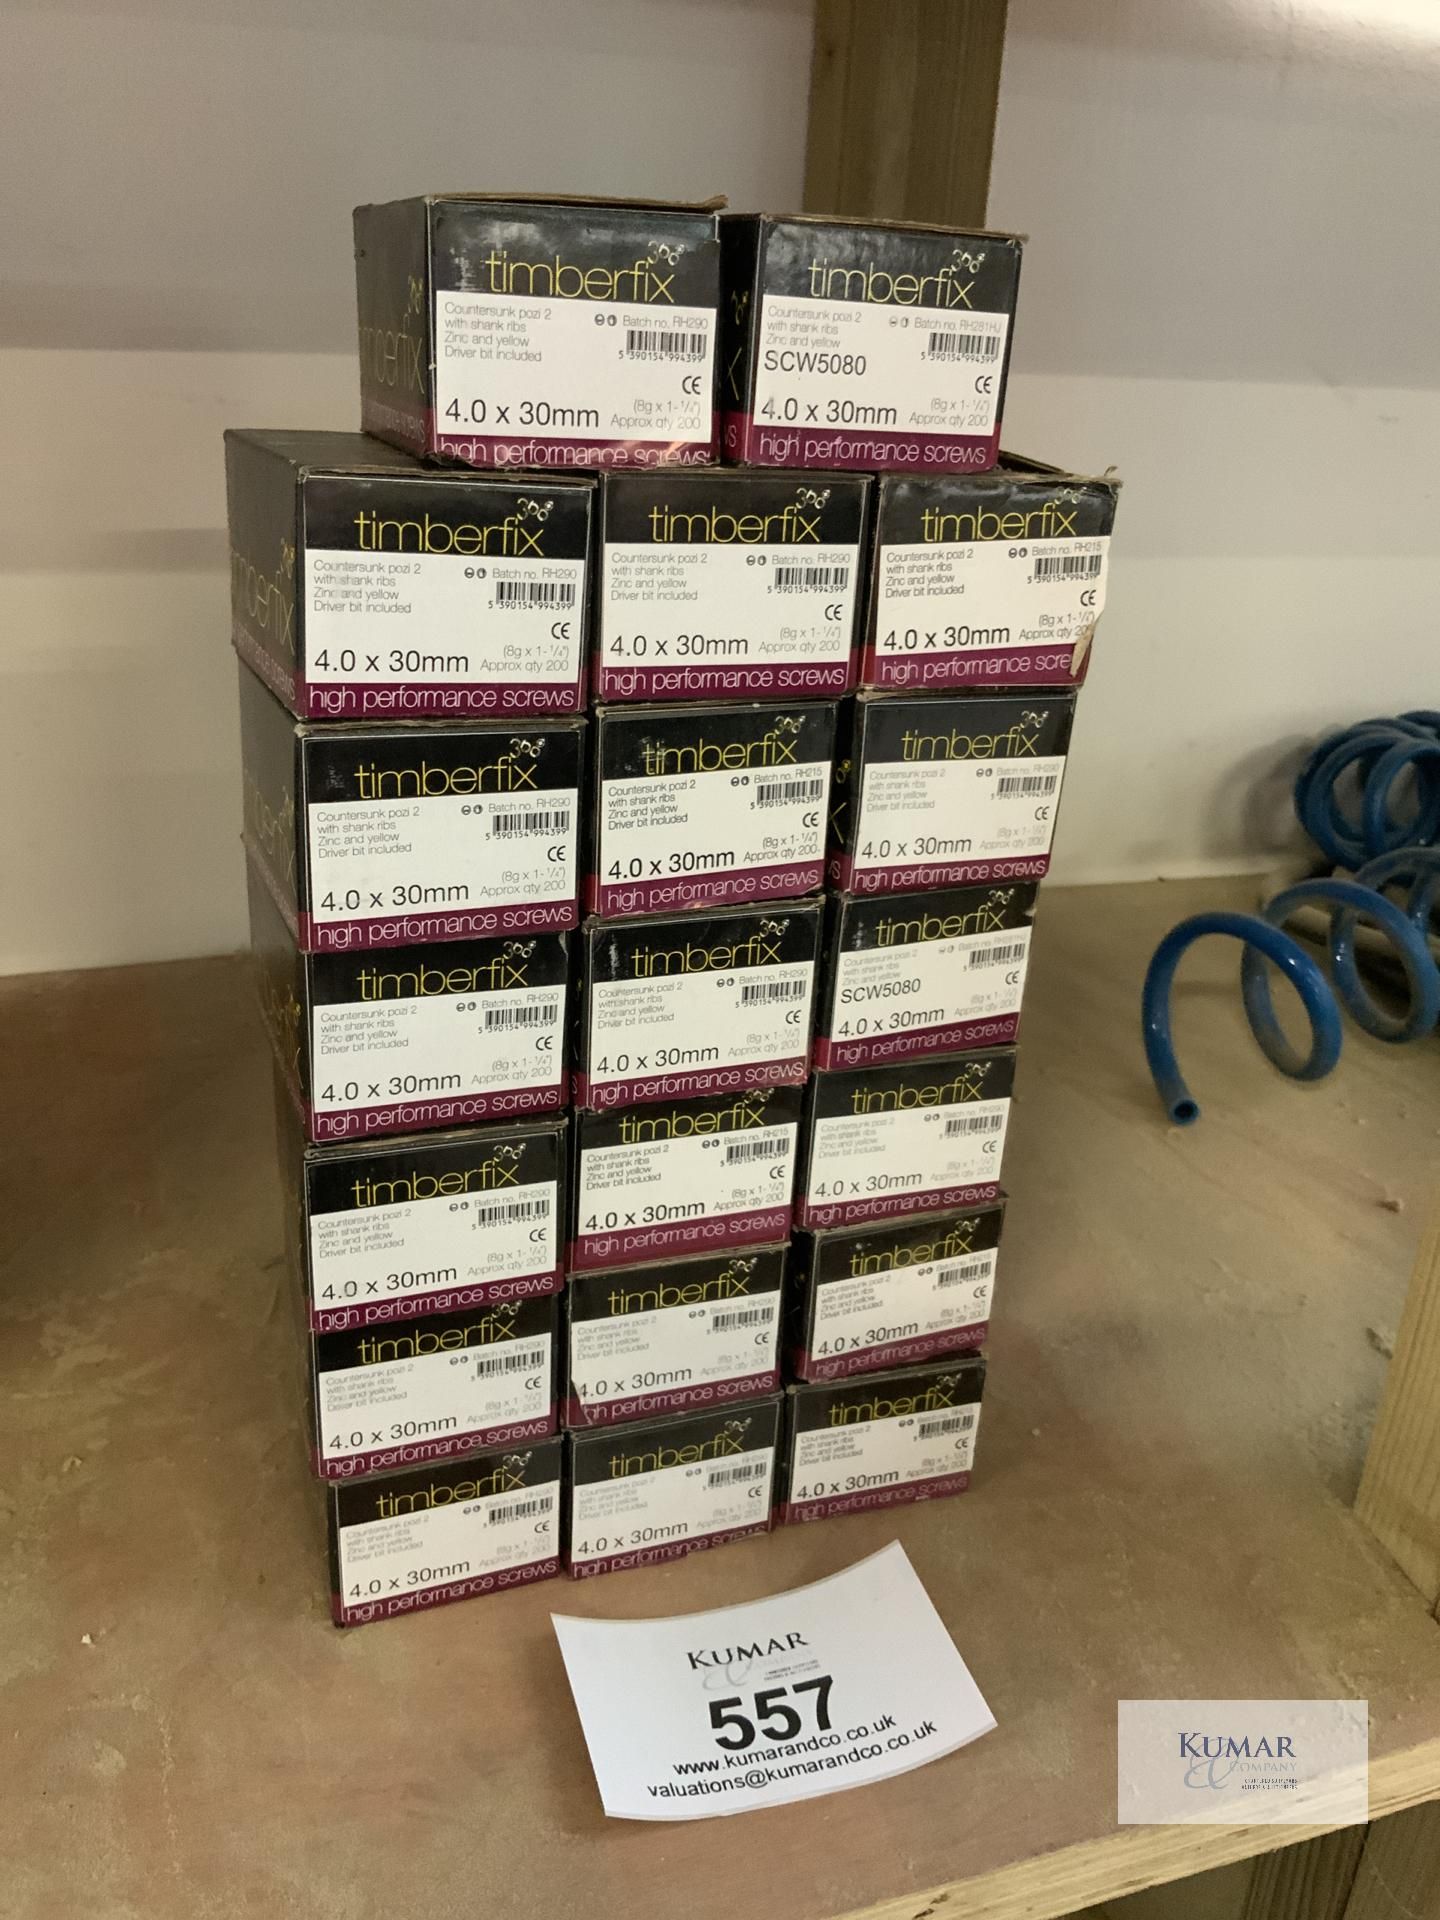 Approx 20 Boxes - 4.0 x 30mm Timberfix Wood Screws - Image 2 of 3